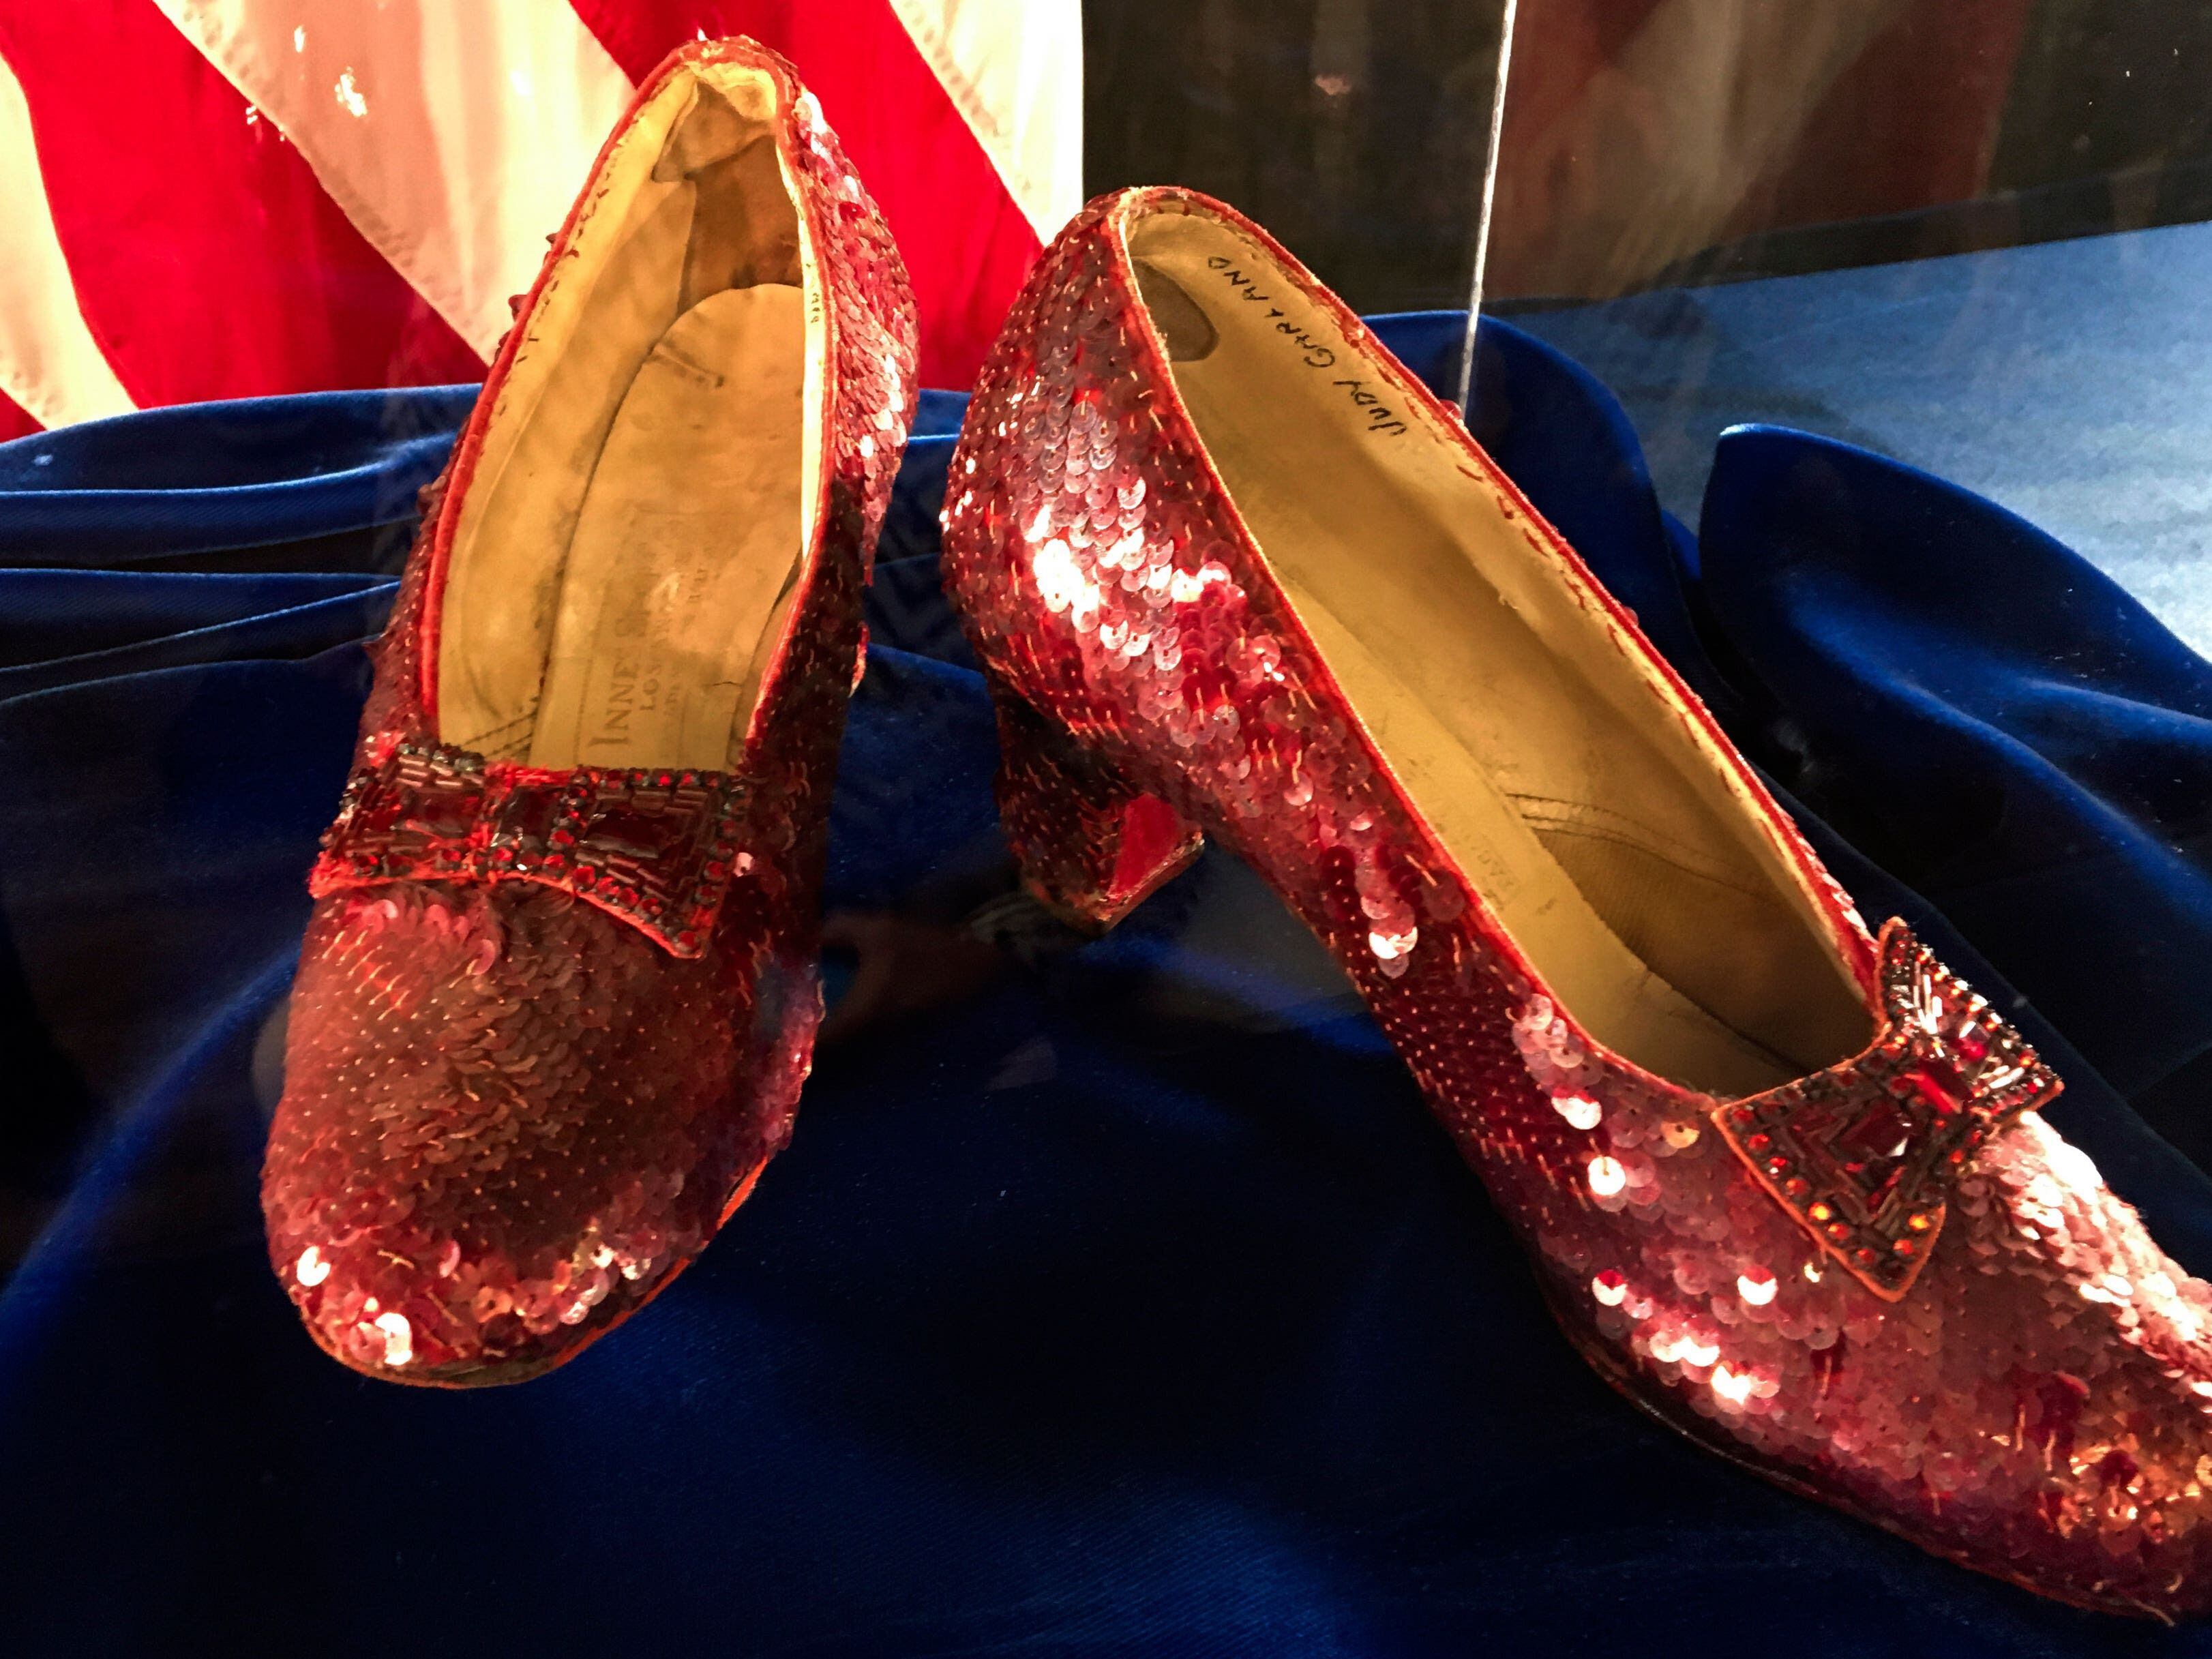 Residents of Judy Garland’s home town seek to buy Wizard Of Oz slippers